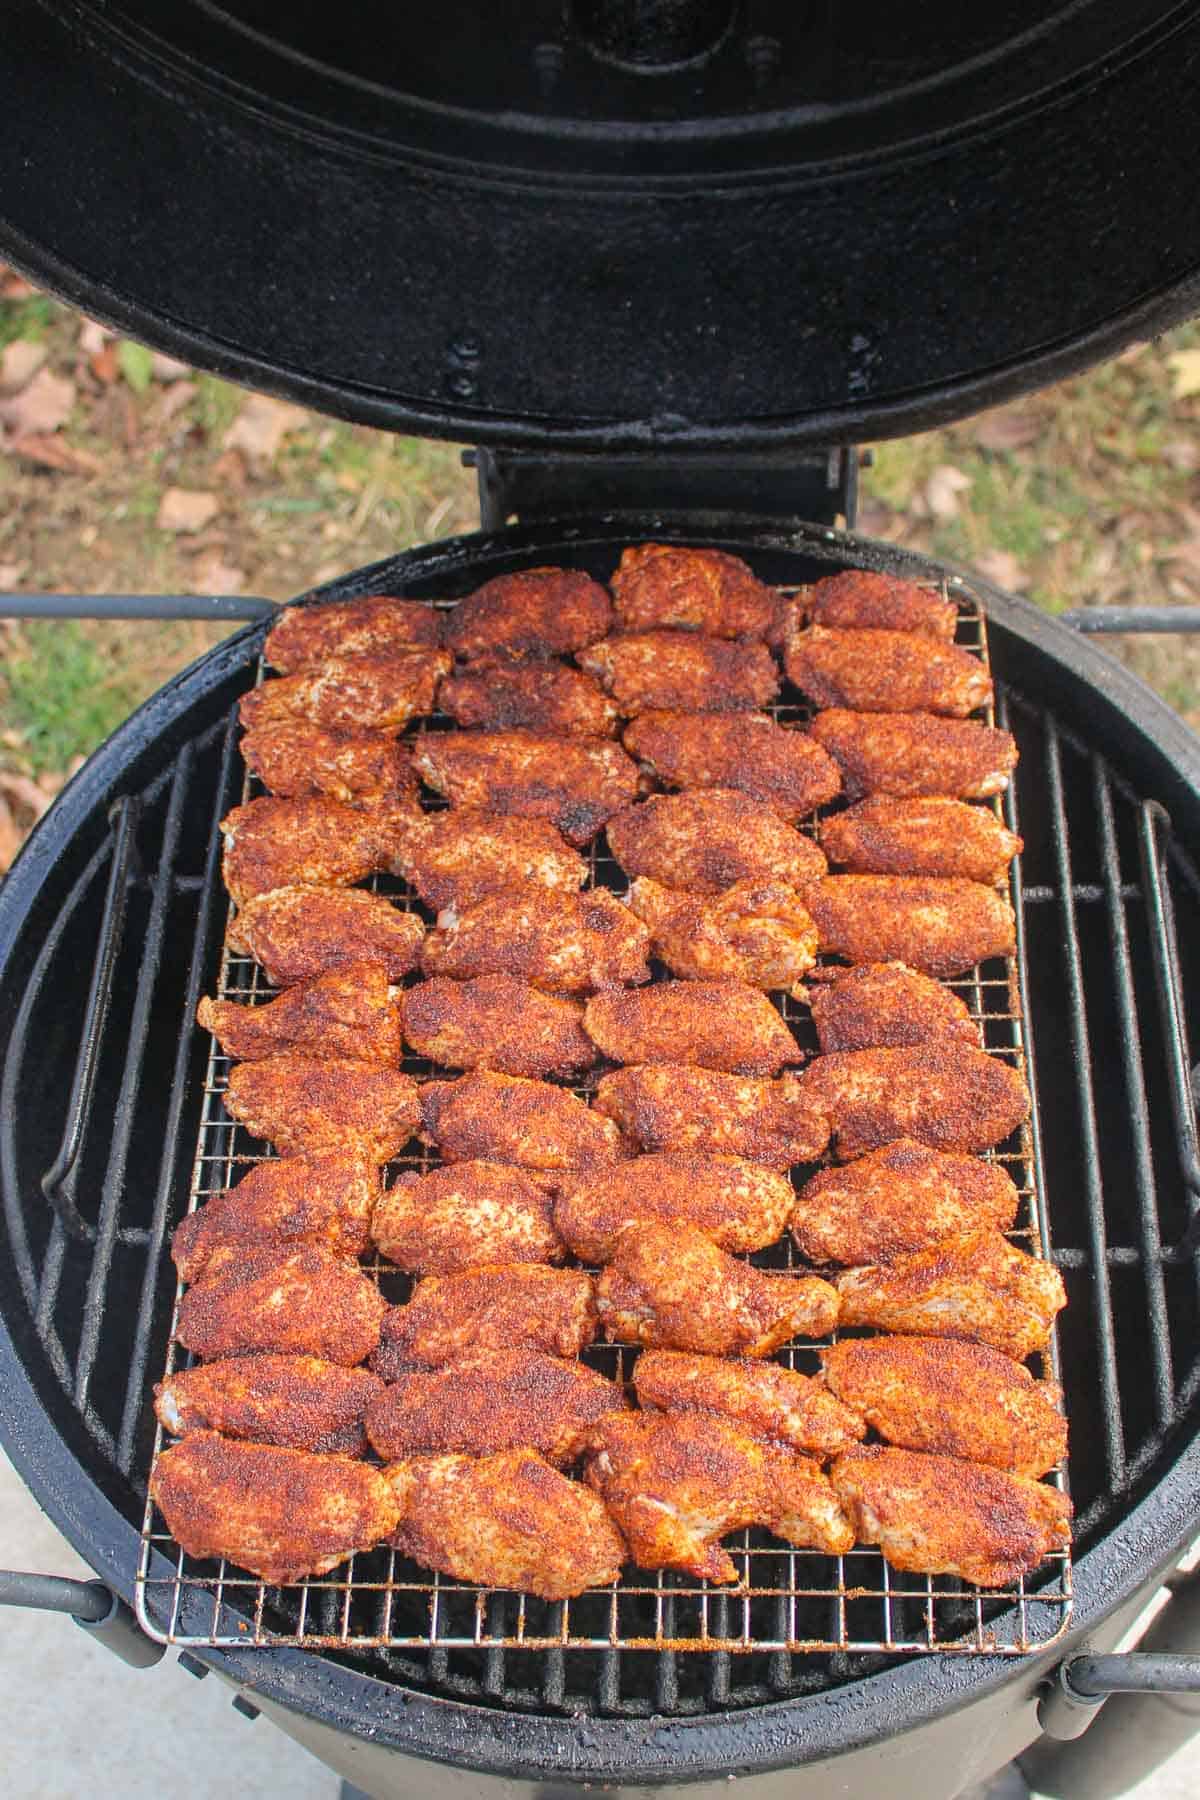 The wings set on the smoker ready to get cooking.